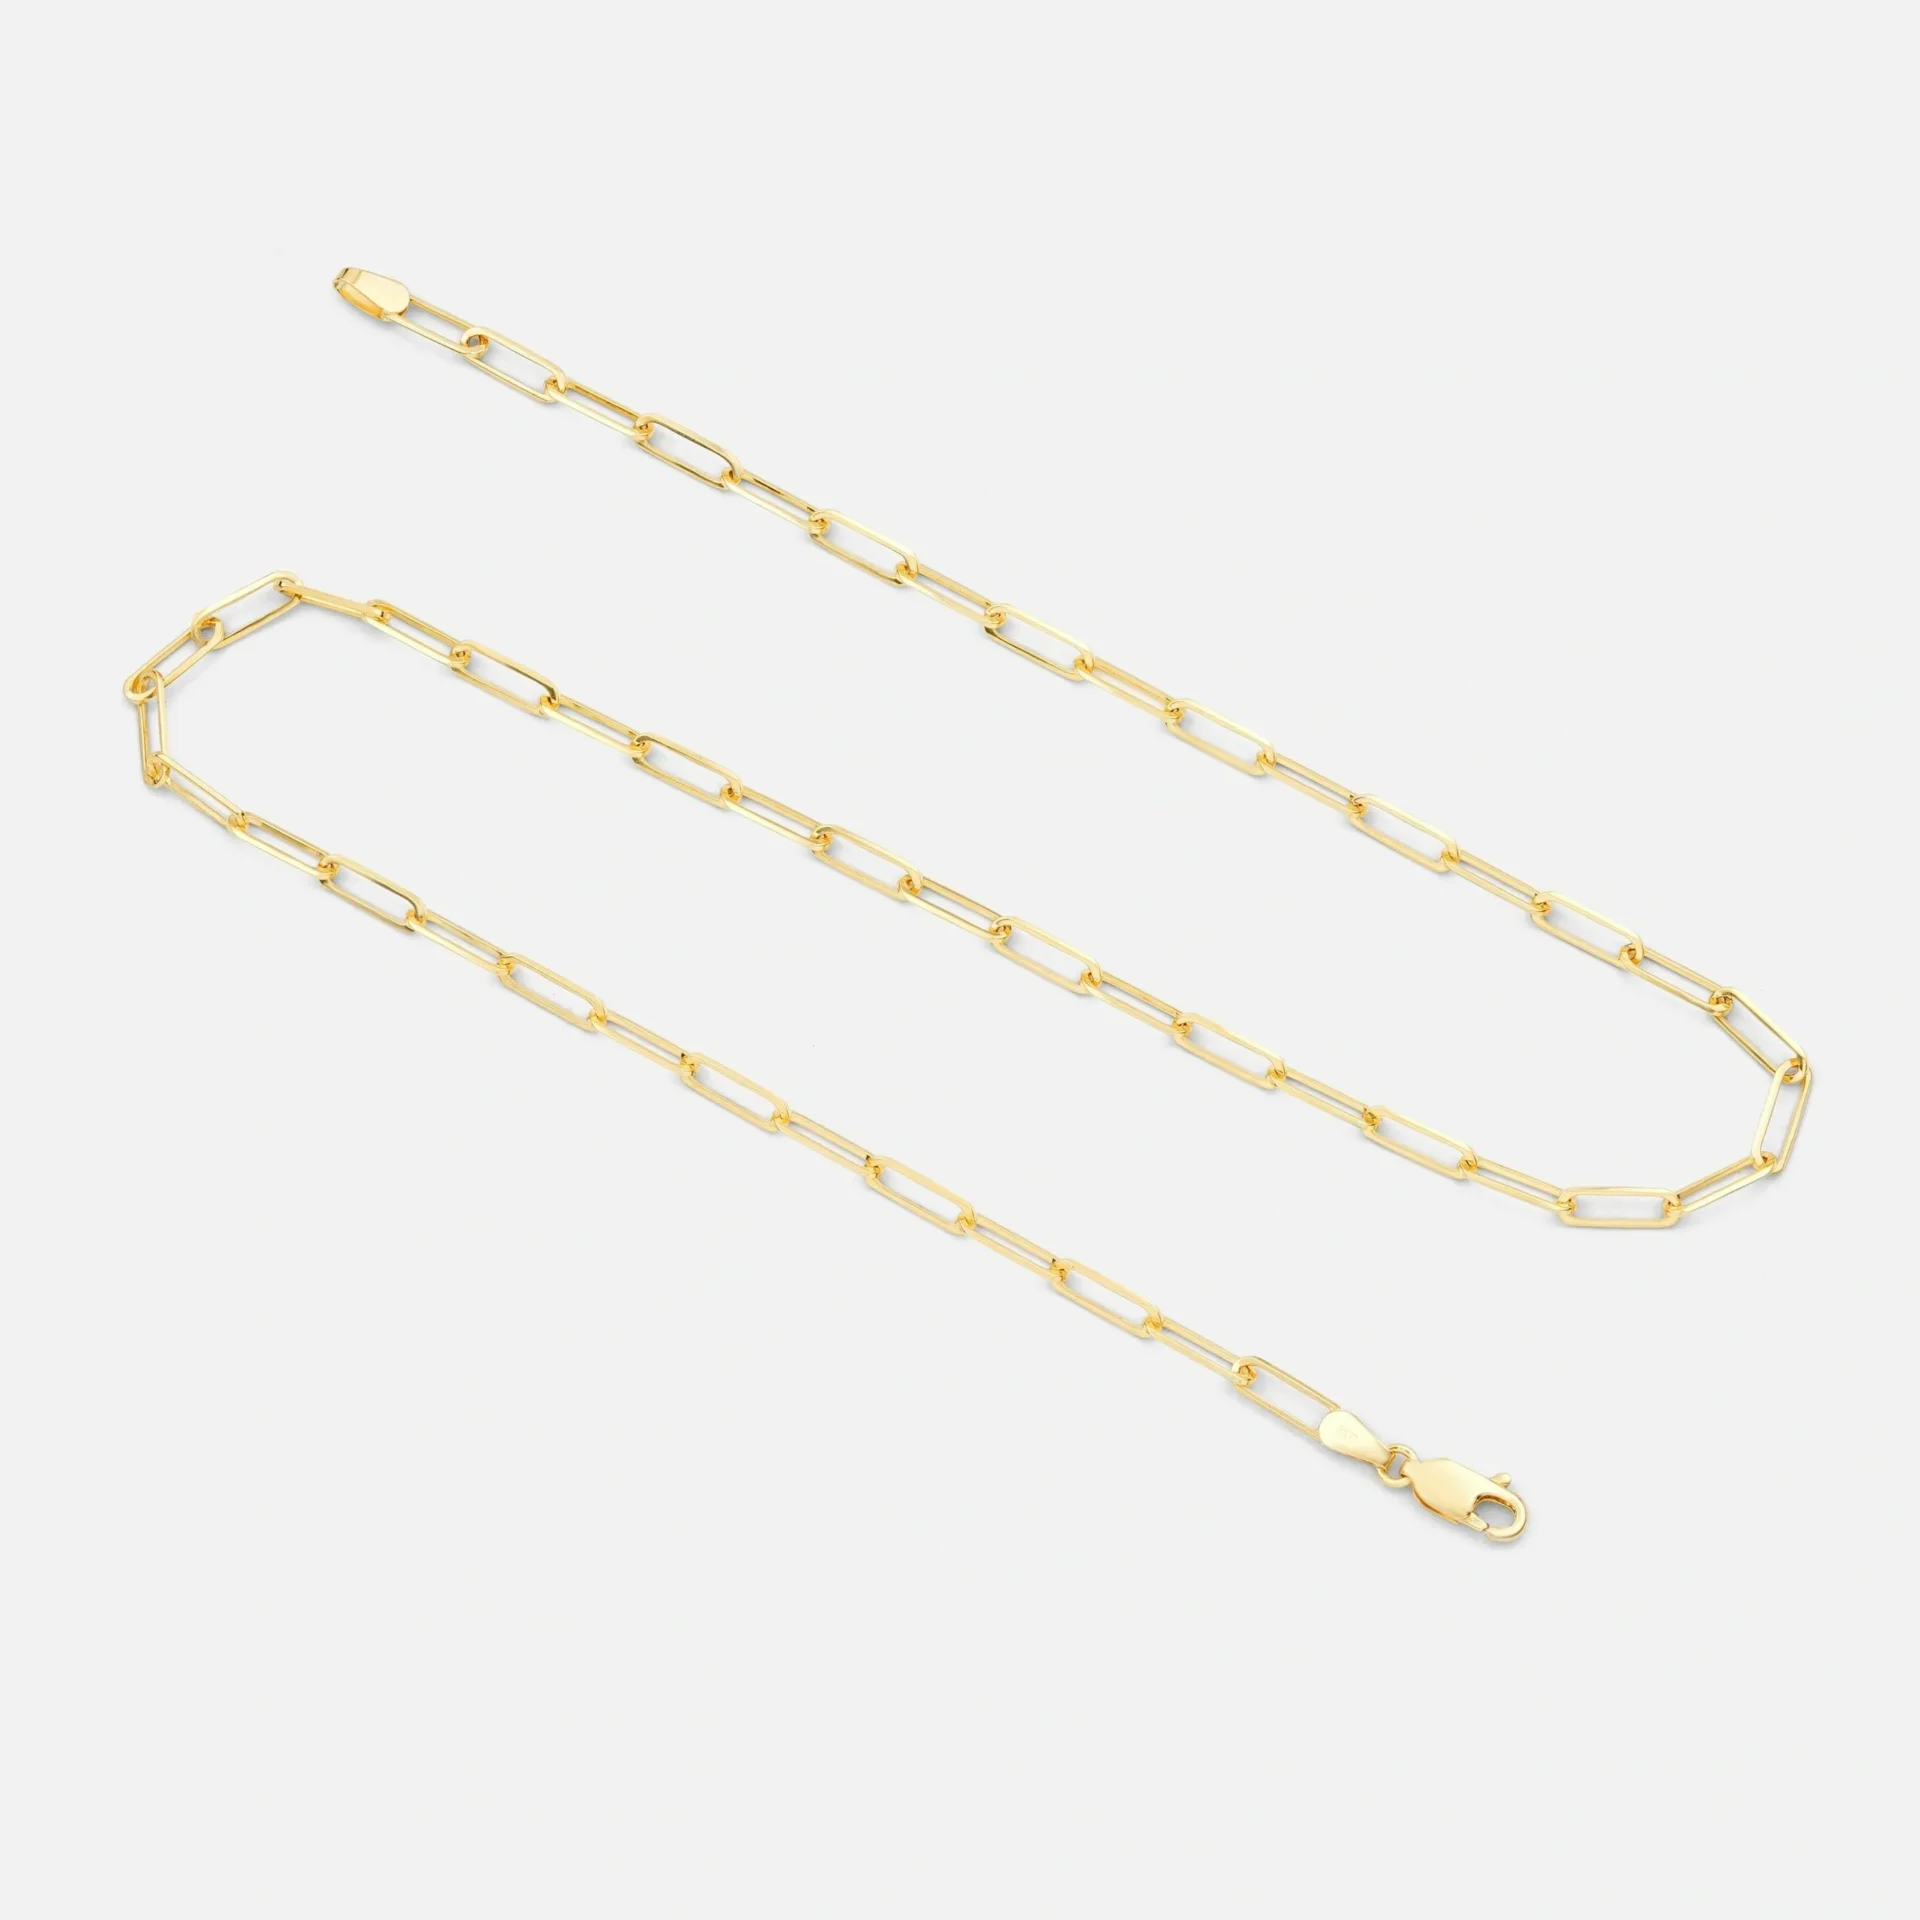 A chain with a gold colored link and a clasp.